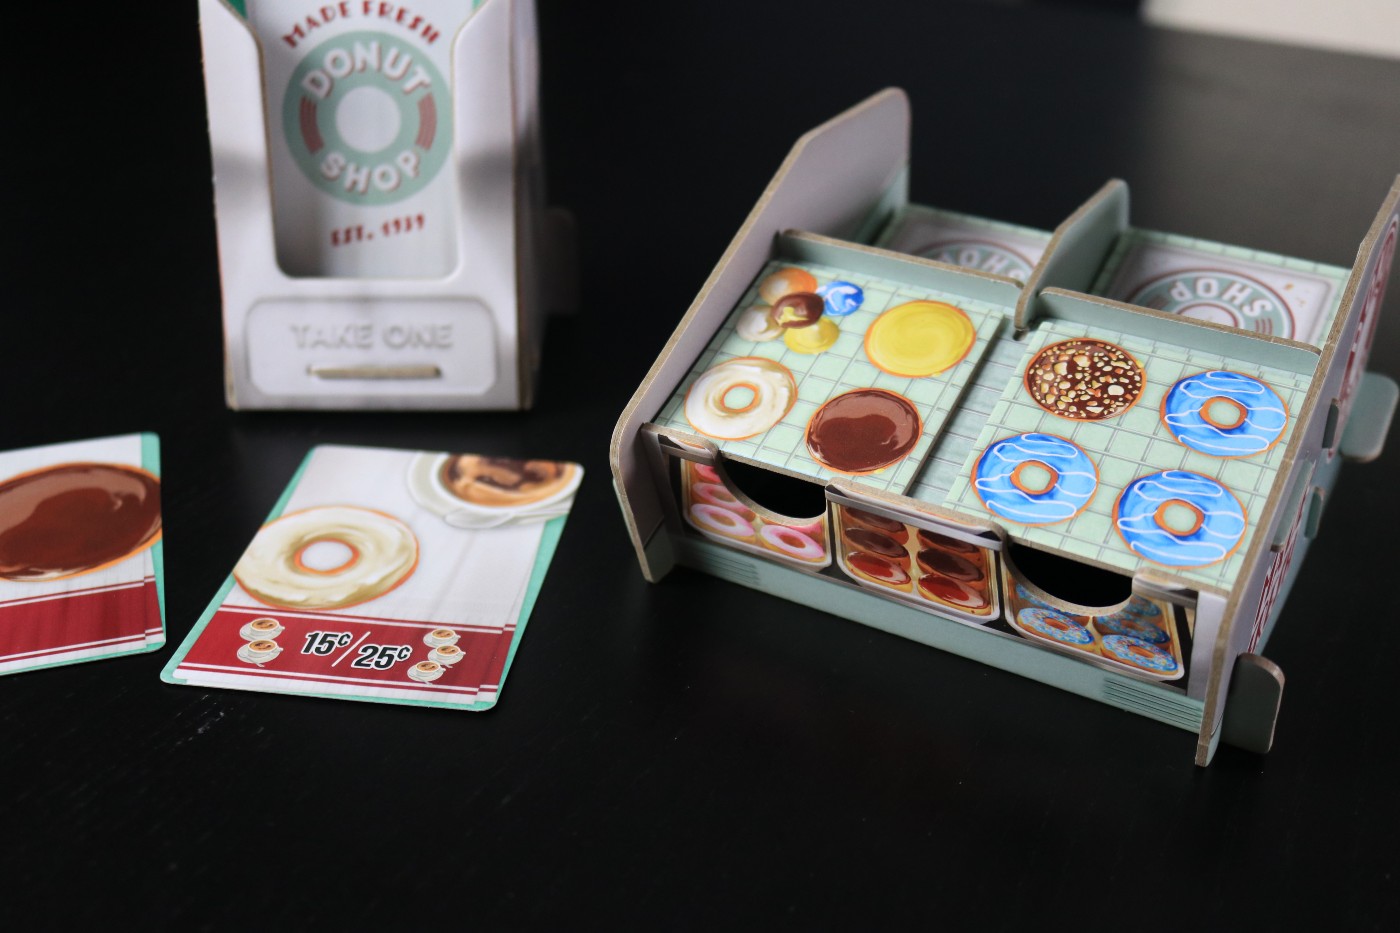 Donut Shop - card and tile display